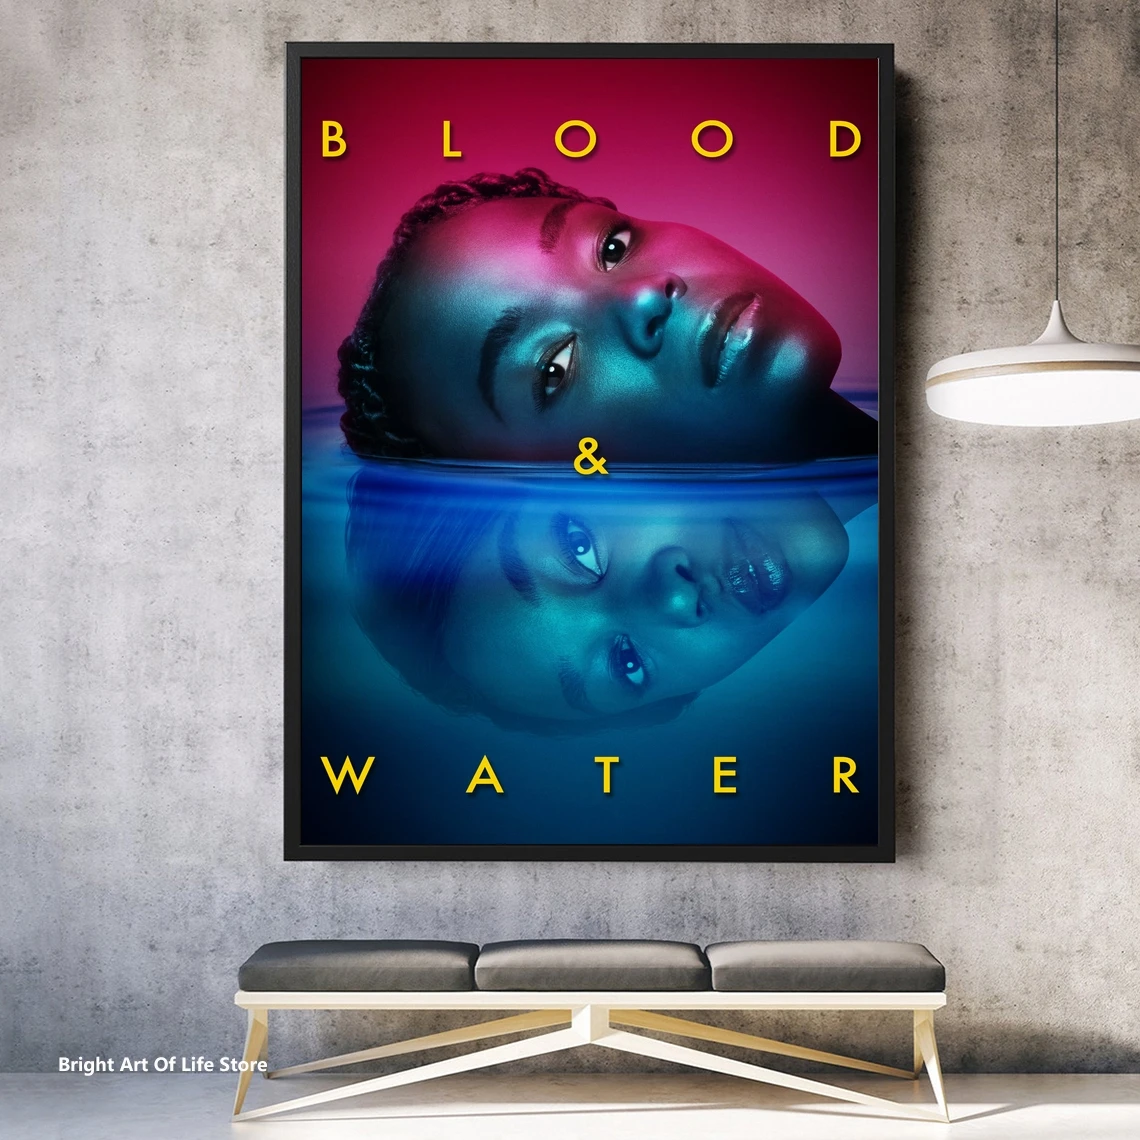 

Blood & Water Poster Star Actor TV Series Canvas Poster Photo Print Wall Painting Home Decor (Unframed)